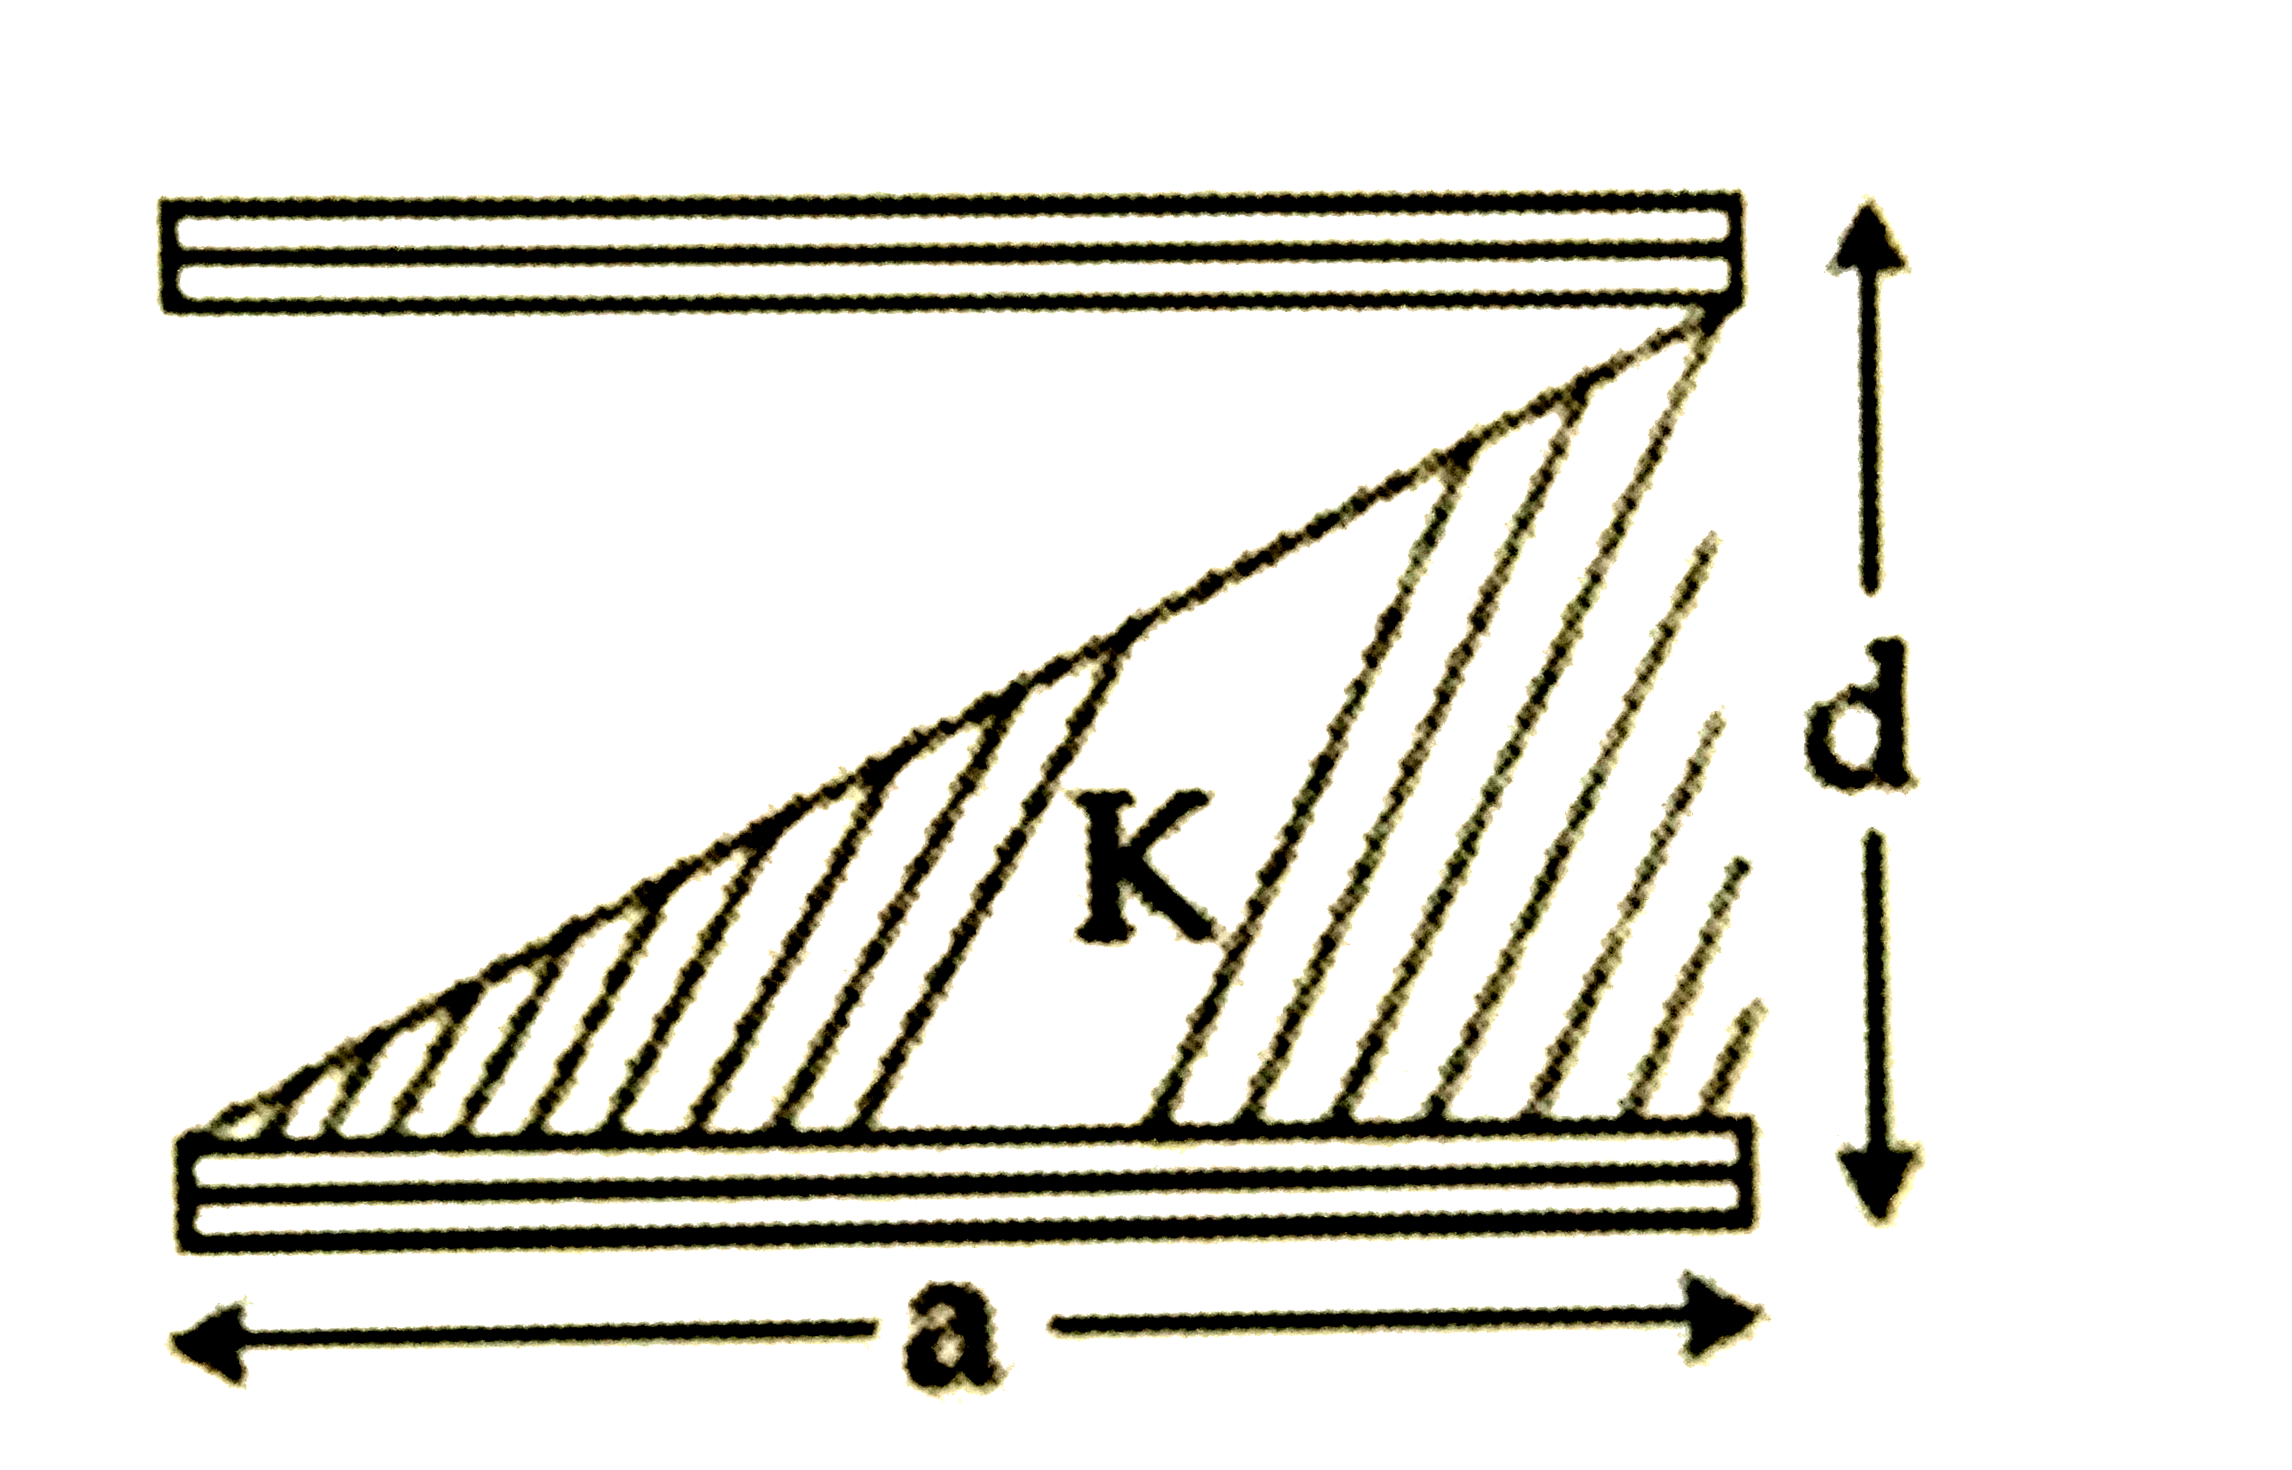 A parallel plate capacitor is made of two square plates of side 'a' , separated by a distance d much less than a. The lower triangular portion is filled with a dielectric of dielectric constant K, as shown in the figure. Capacitance of this Capacitor is :   a) (Kin(0)a^(2))/(2d(K+1))
b) (Kin(0)a^(2))/(d(K-1)) In K
  c) (Kin(0)a^(2))/(d)In K
  d) (1)/(2)(Kin(0)a^(2))/(d)